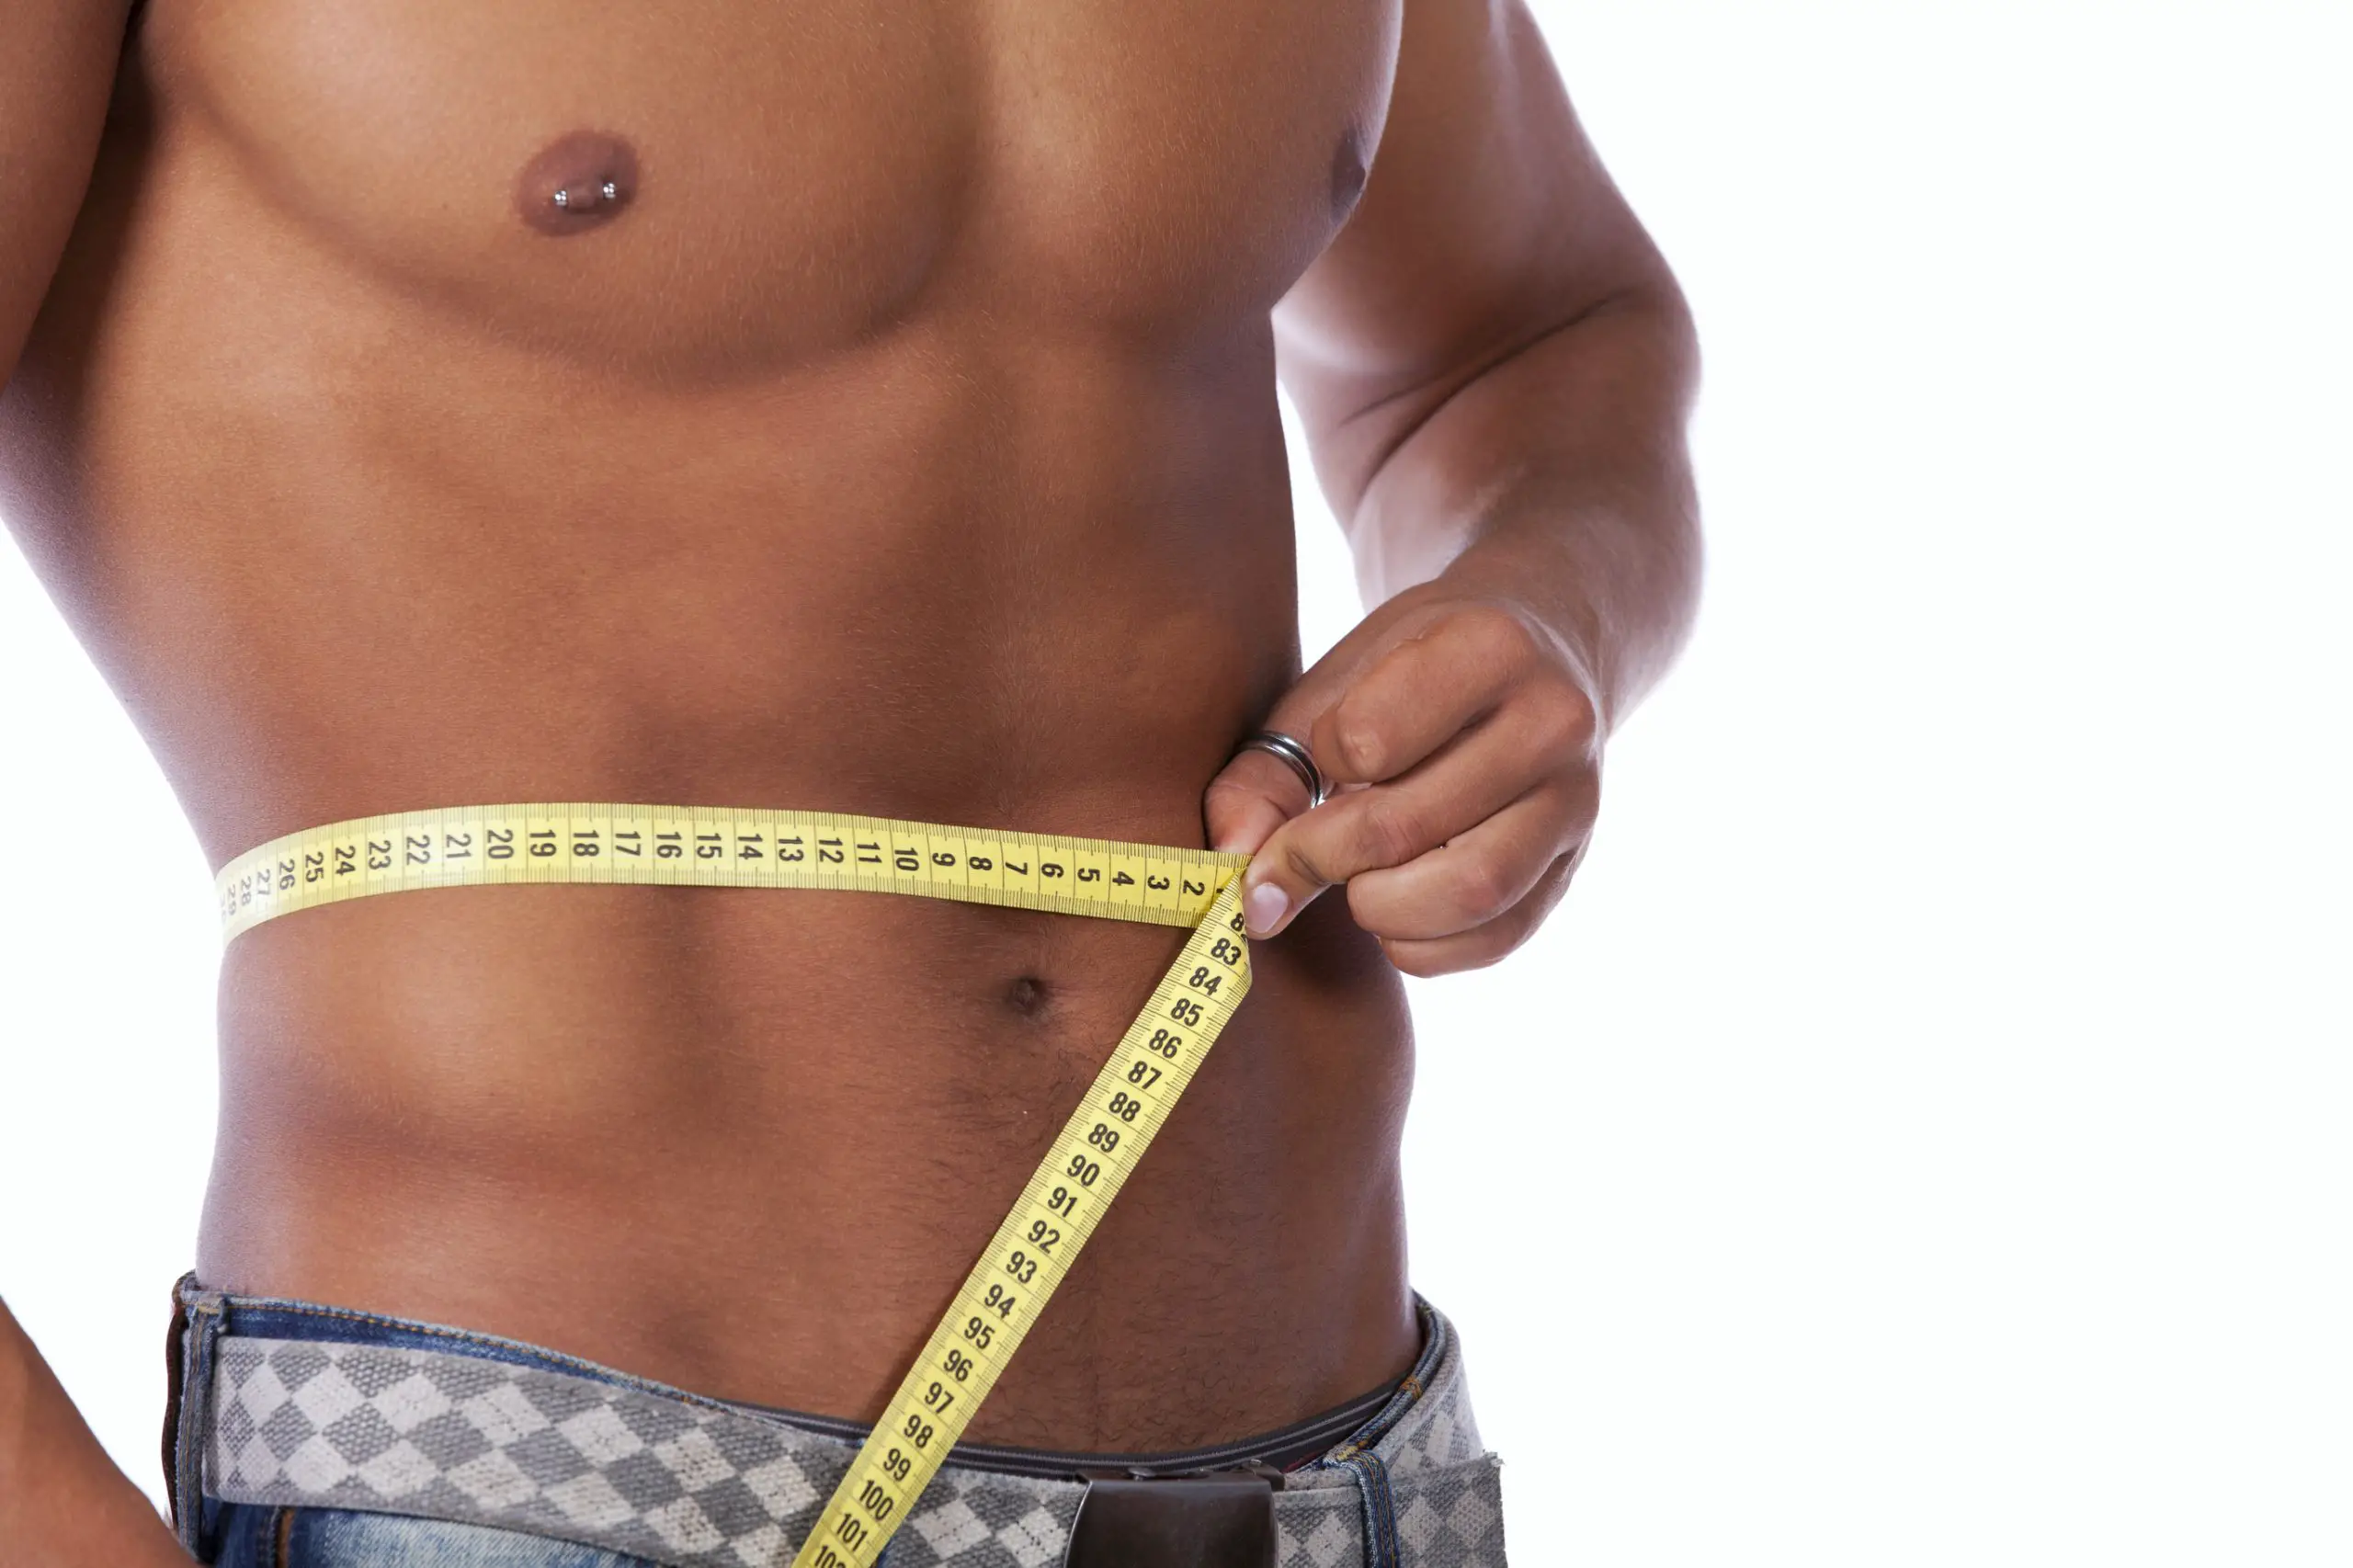 Working out for a six pack without losing weight scaled